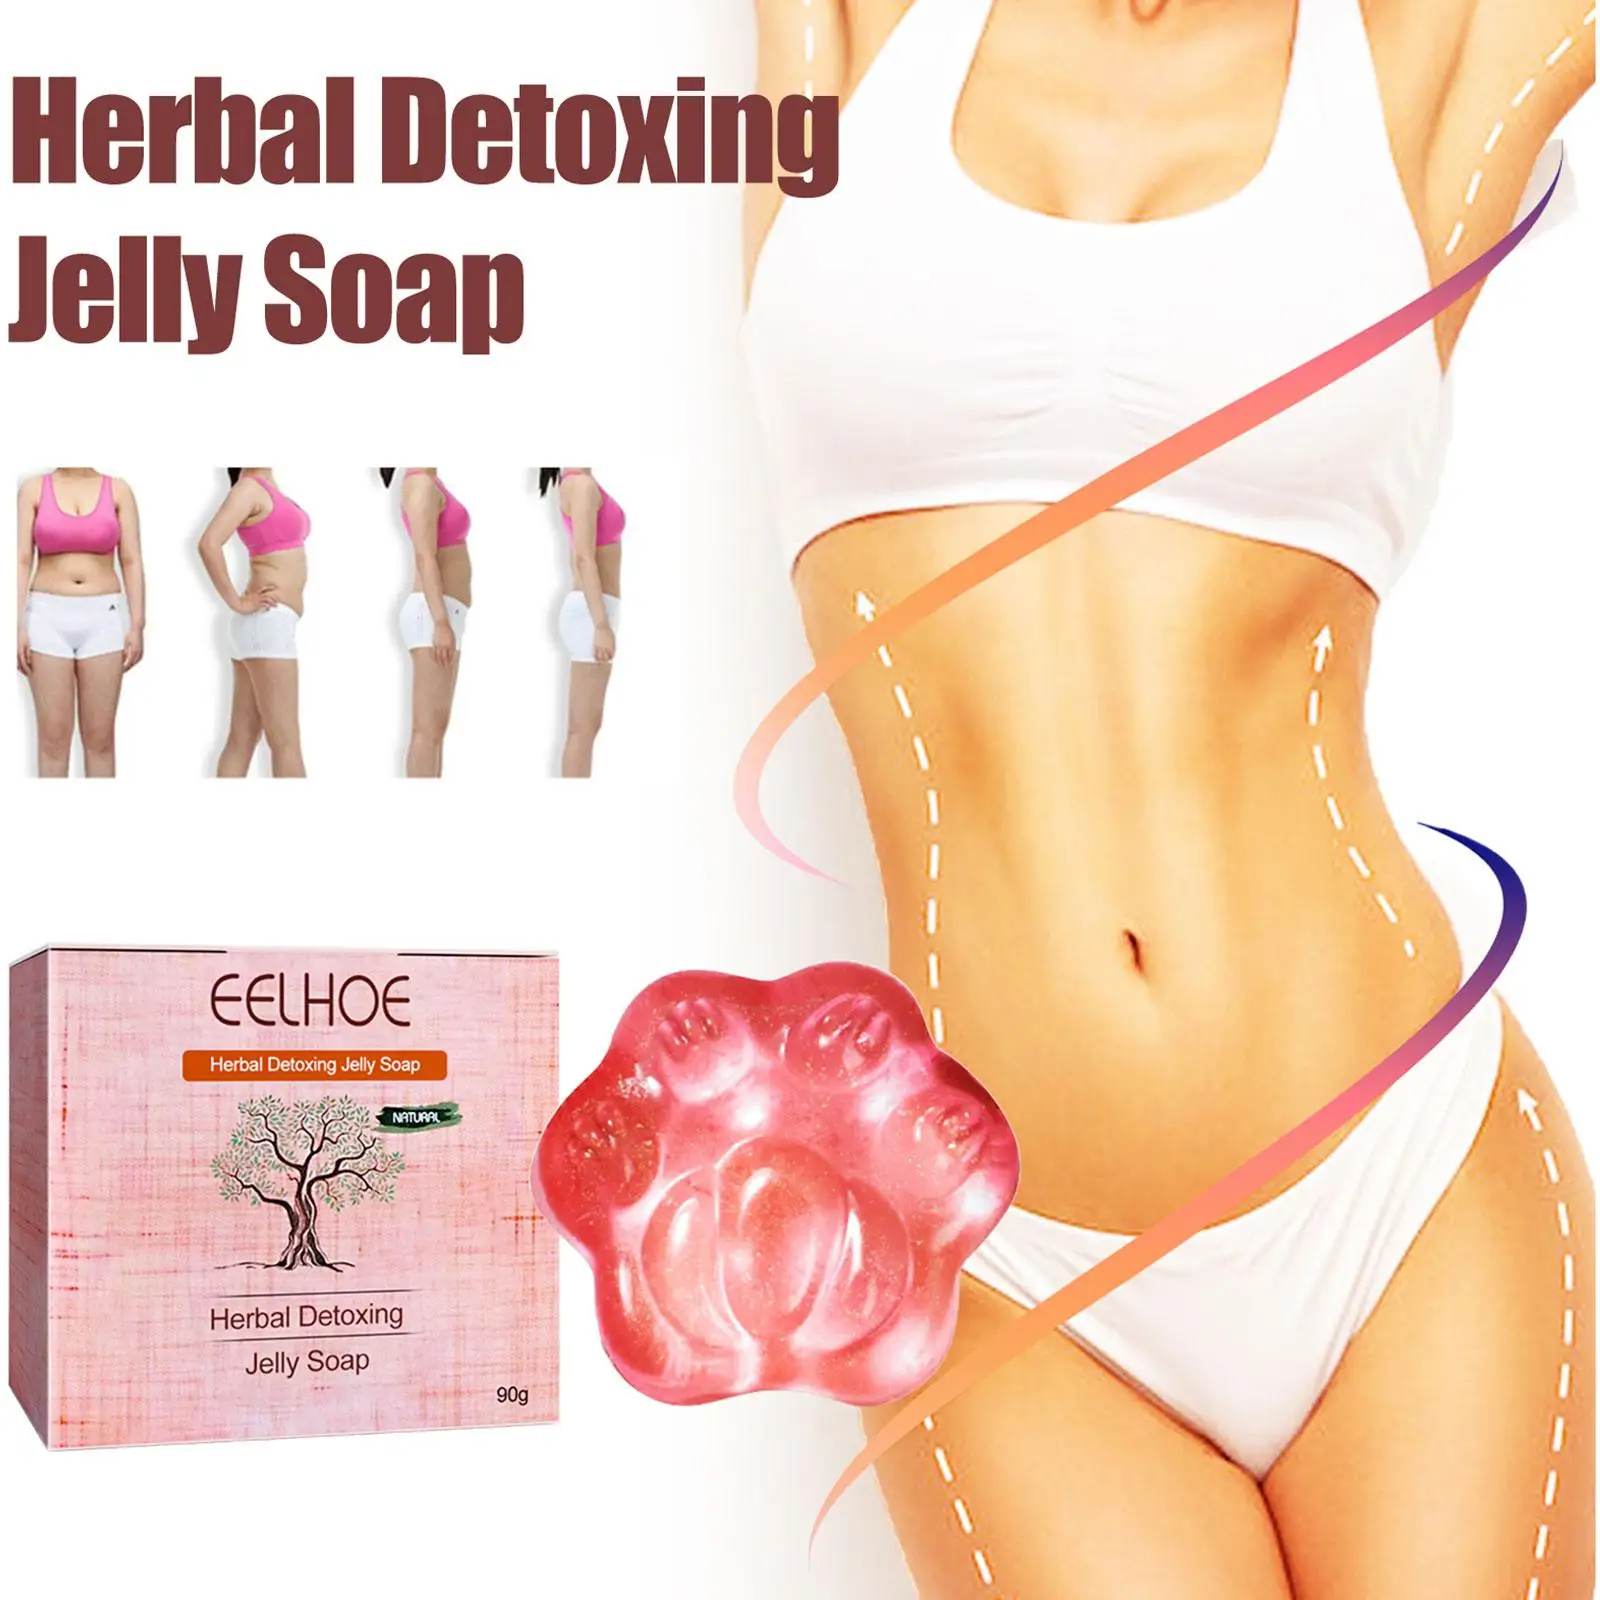 

HEALLOR 90g Herbal Detox Jelly Soap Cleaning Nourishing Oil-Control Whitening Acne Treatment Mite Removal Slimming Soap